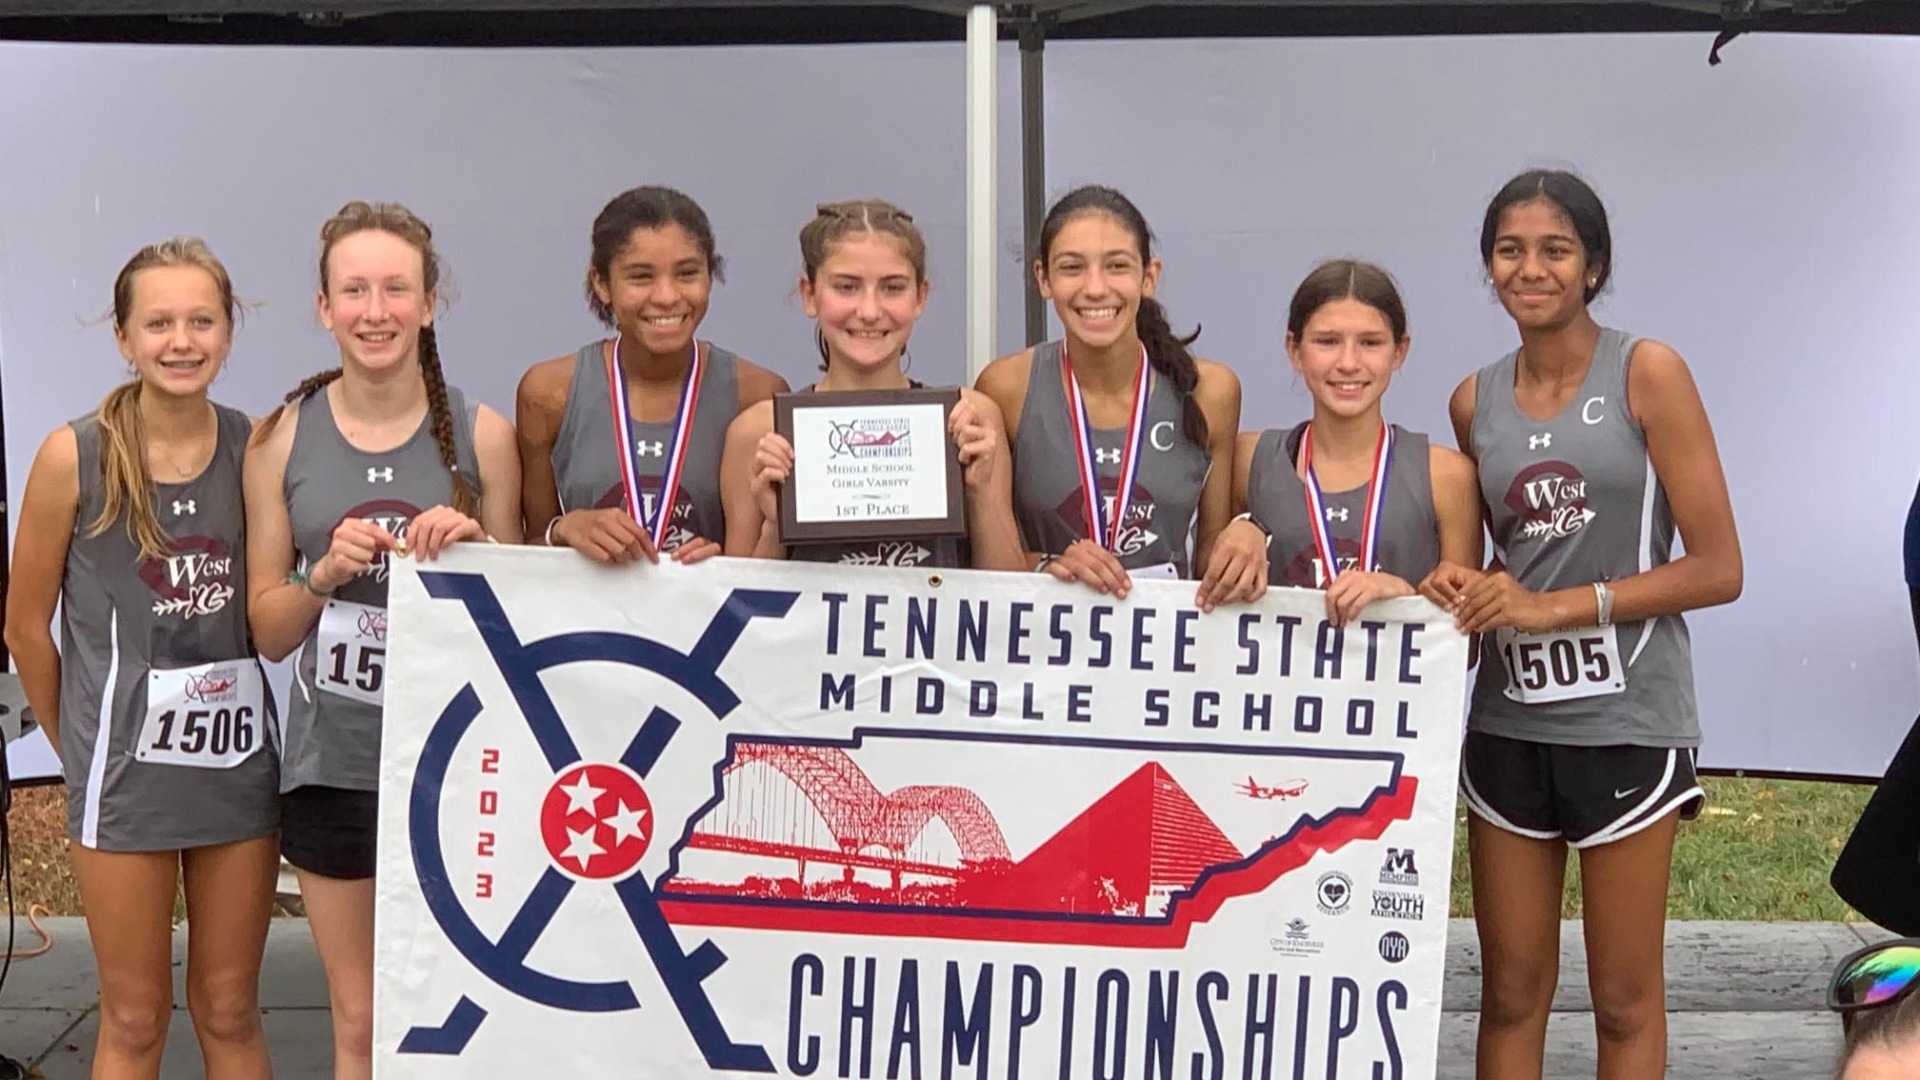 West ColliervilleSlide 1 - The Lady Dragons are the Tennessee State Champions